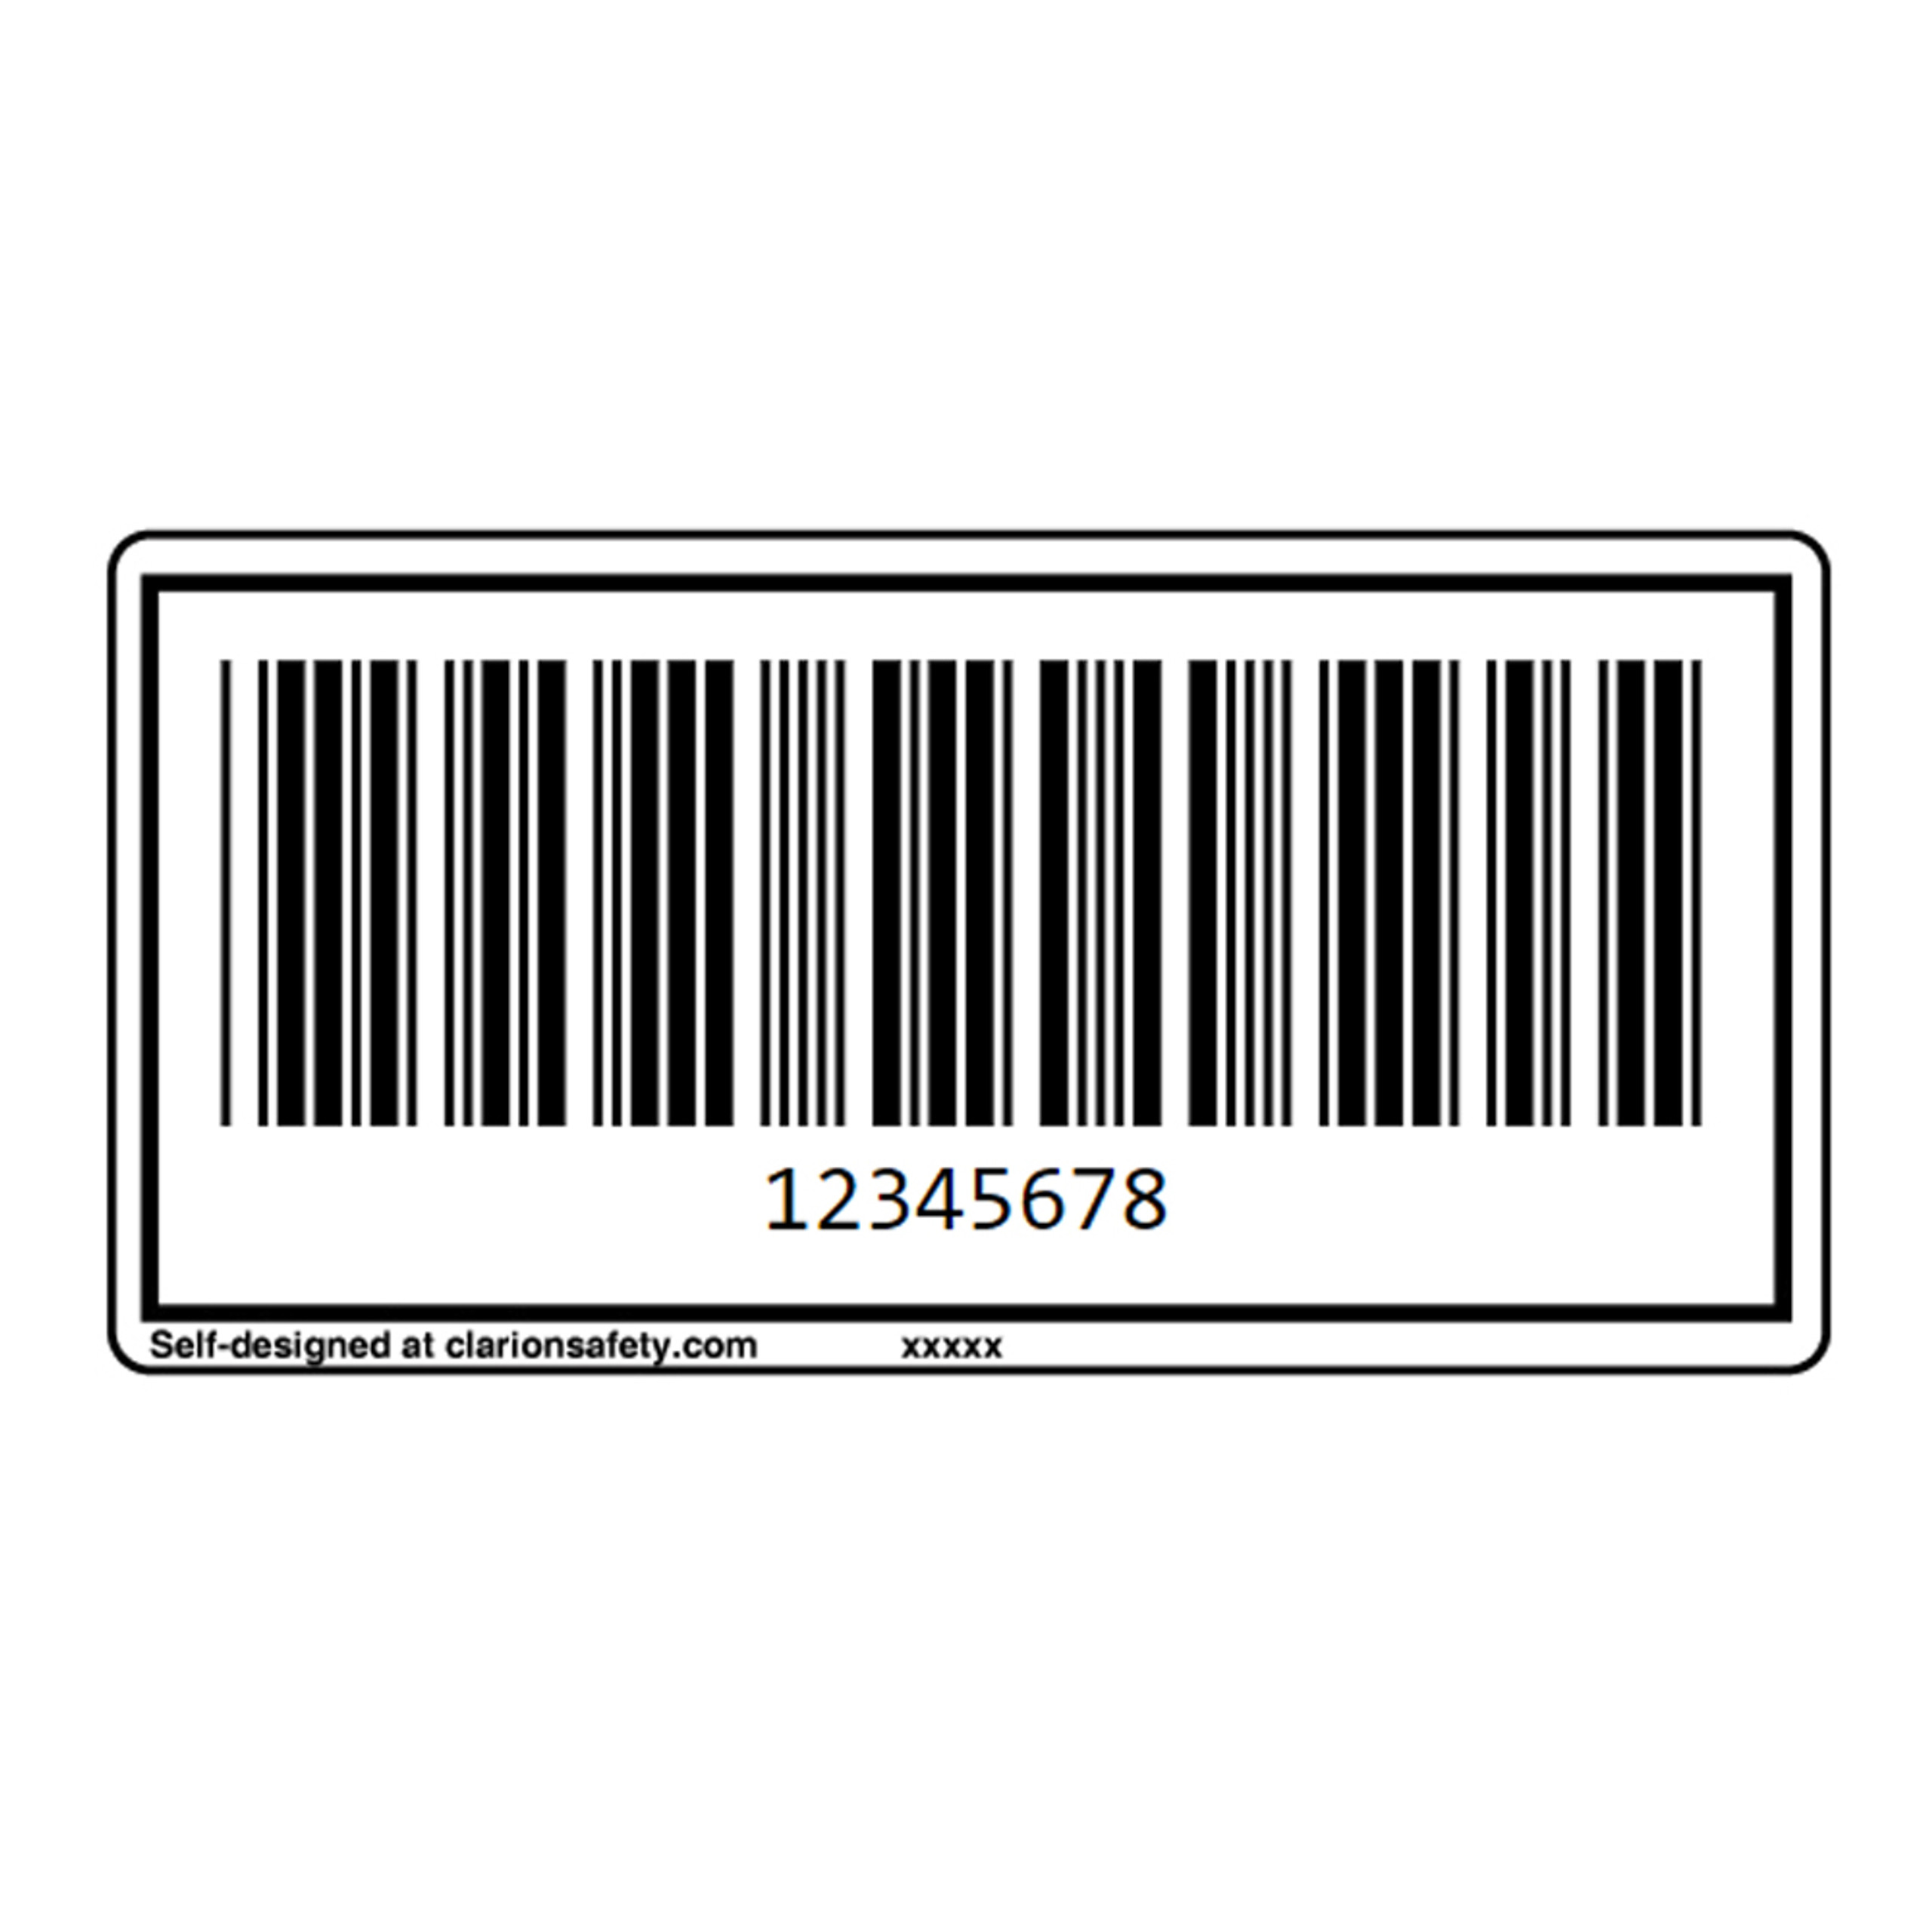 Make a Unique EAN13 (GTIN) Barcode Label Clarion Safety Systems